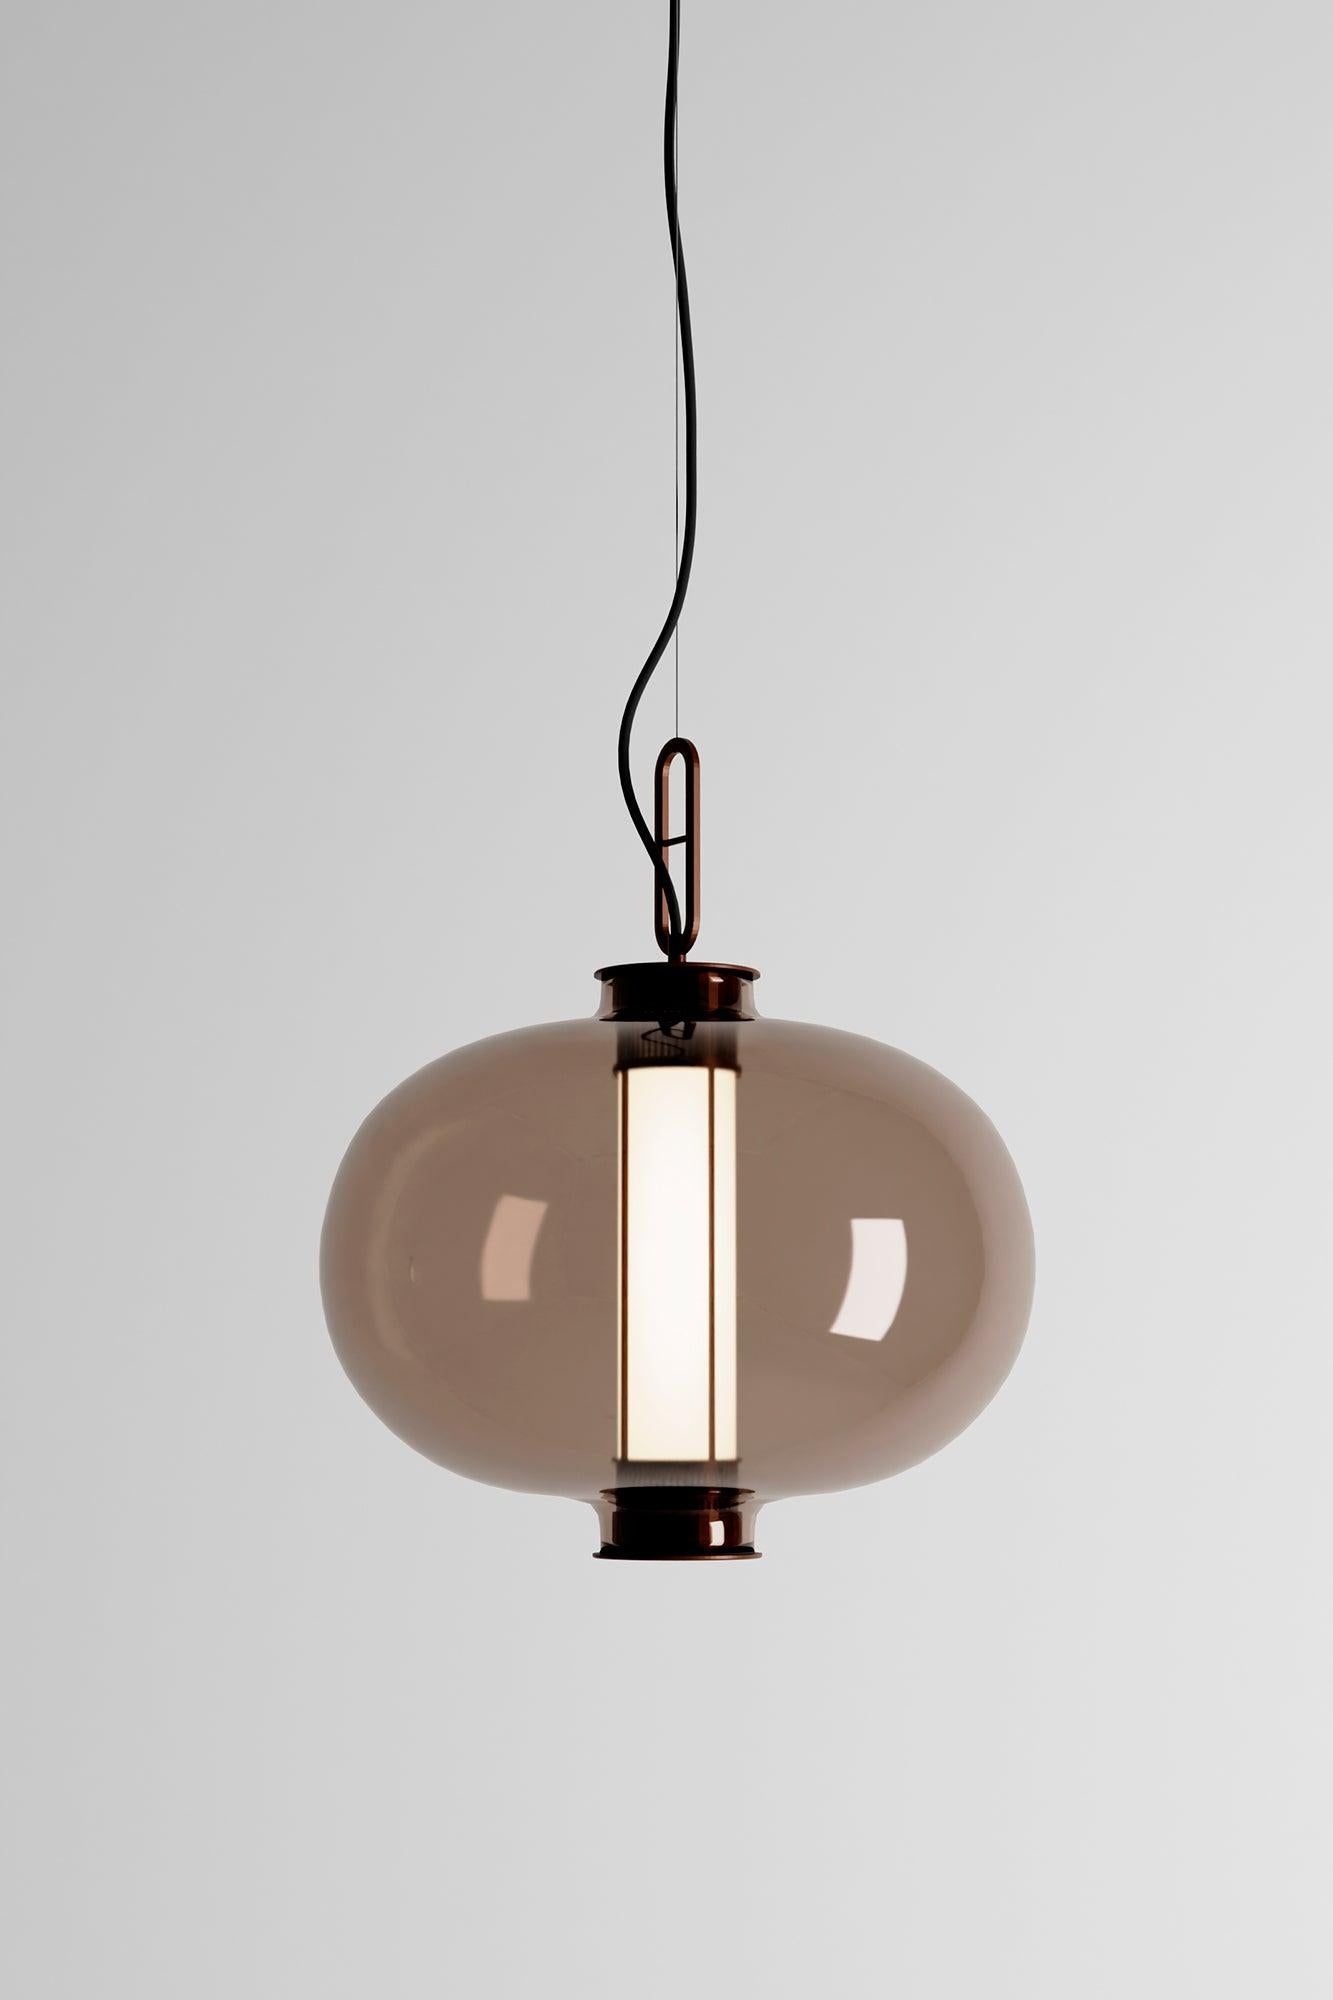 BAI T MA MA - Outdoor

Suspension lamp, model BAI T MA MA Outdoor, designed by Neri & Hu in 2014. 
Manufactured by Parachilna. 

This collection is inspired by traditional Chinese lanterns. This version however, is a sophisticated one. Made of an